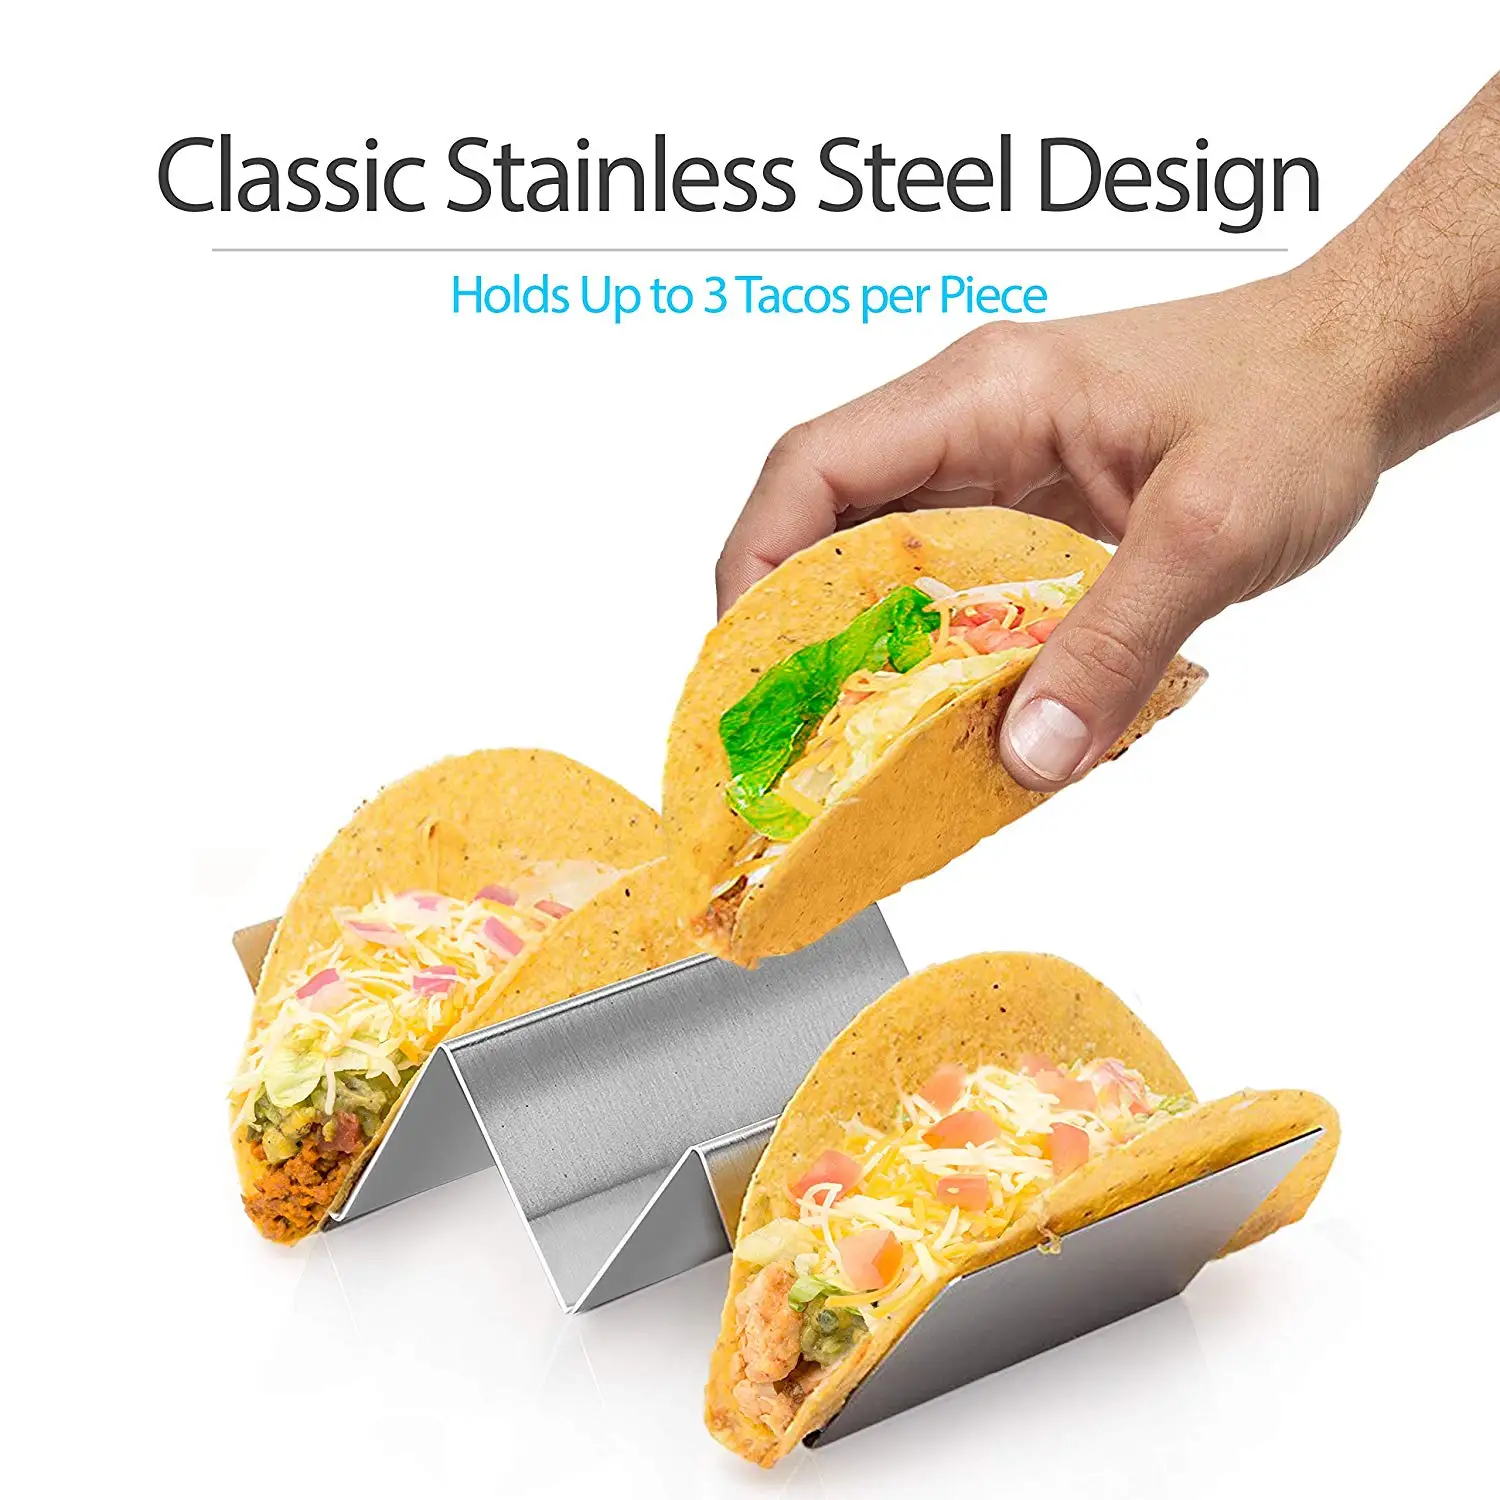 Rack Holds Up to 6 Tacos Each Safe for Baking Unique Gear Shape Design Dishwasher and Grill Safe Taco Holder by Fnova 2 Pack Stainless Steel Taco Stand 